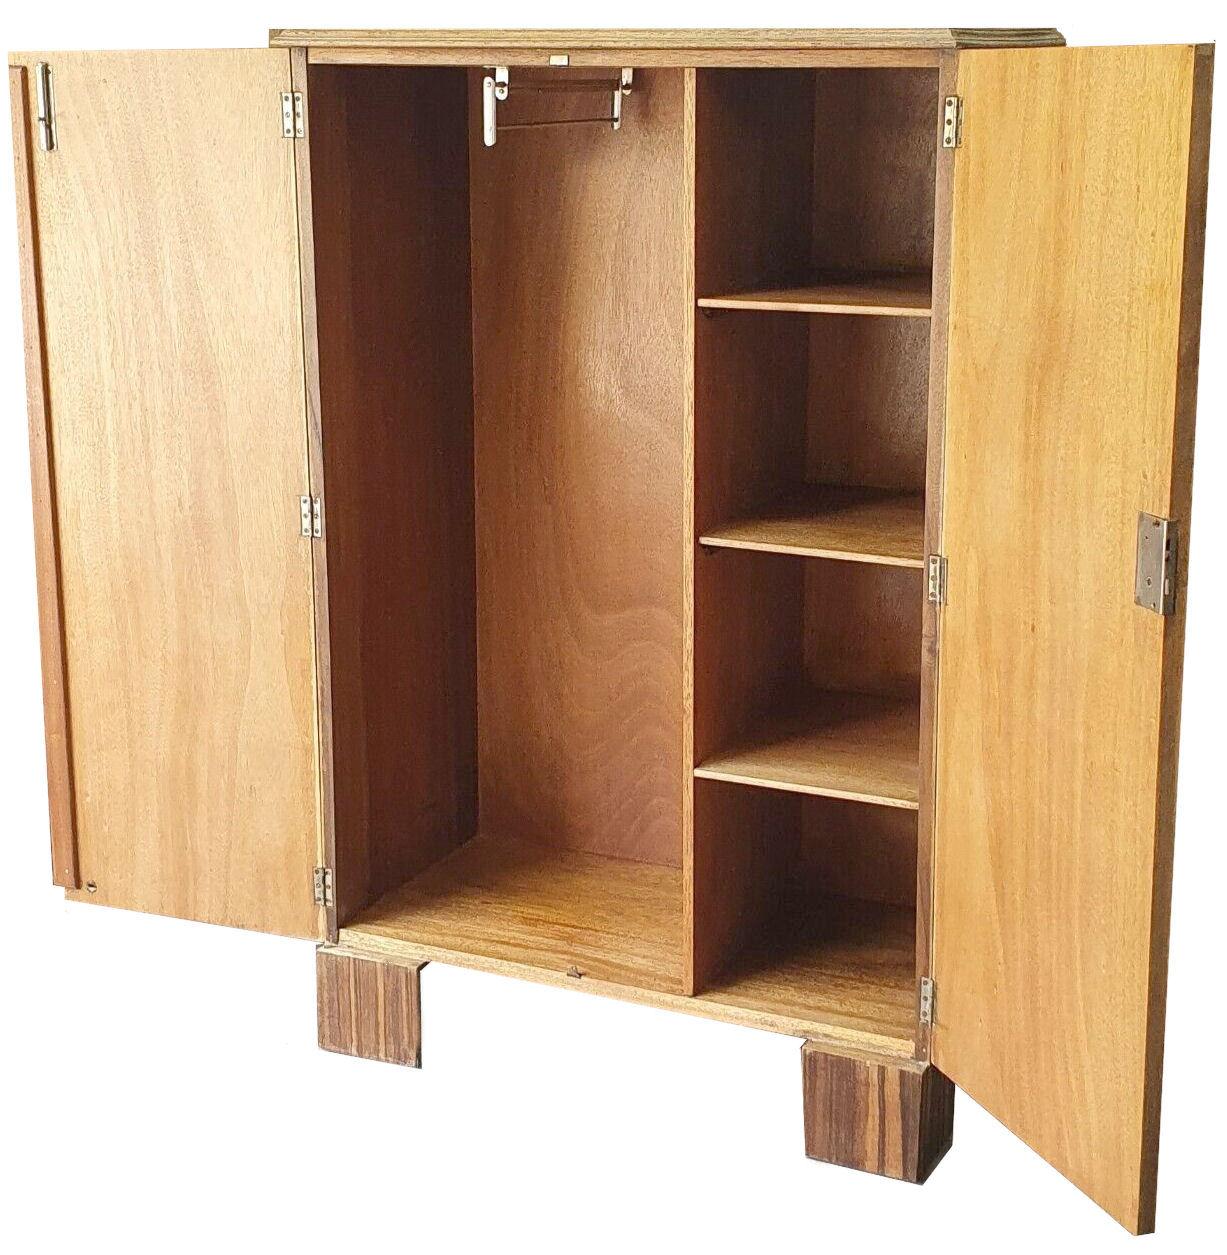 For your consideration is this fabulously styled Art Deco wardrobe dating to the 1930's. Small and well proportioned this wardrobe has stunning Walnut grain with book paged veneers which has been cut to give a cloud effect to the doors. The edges